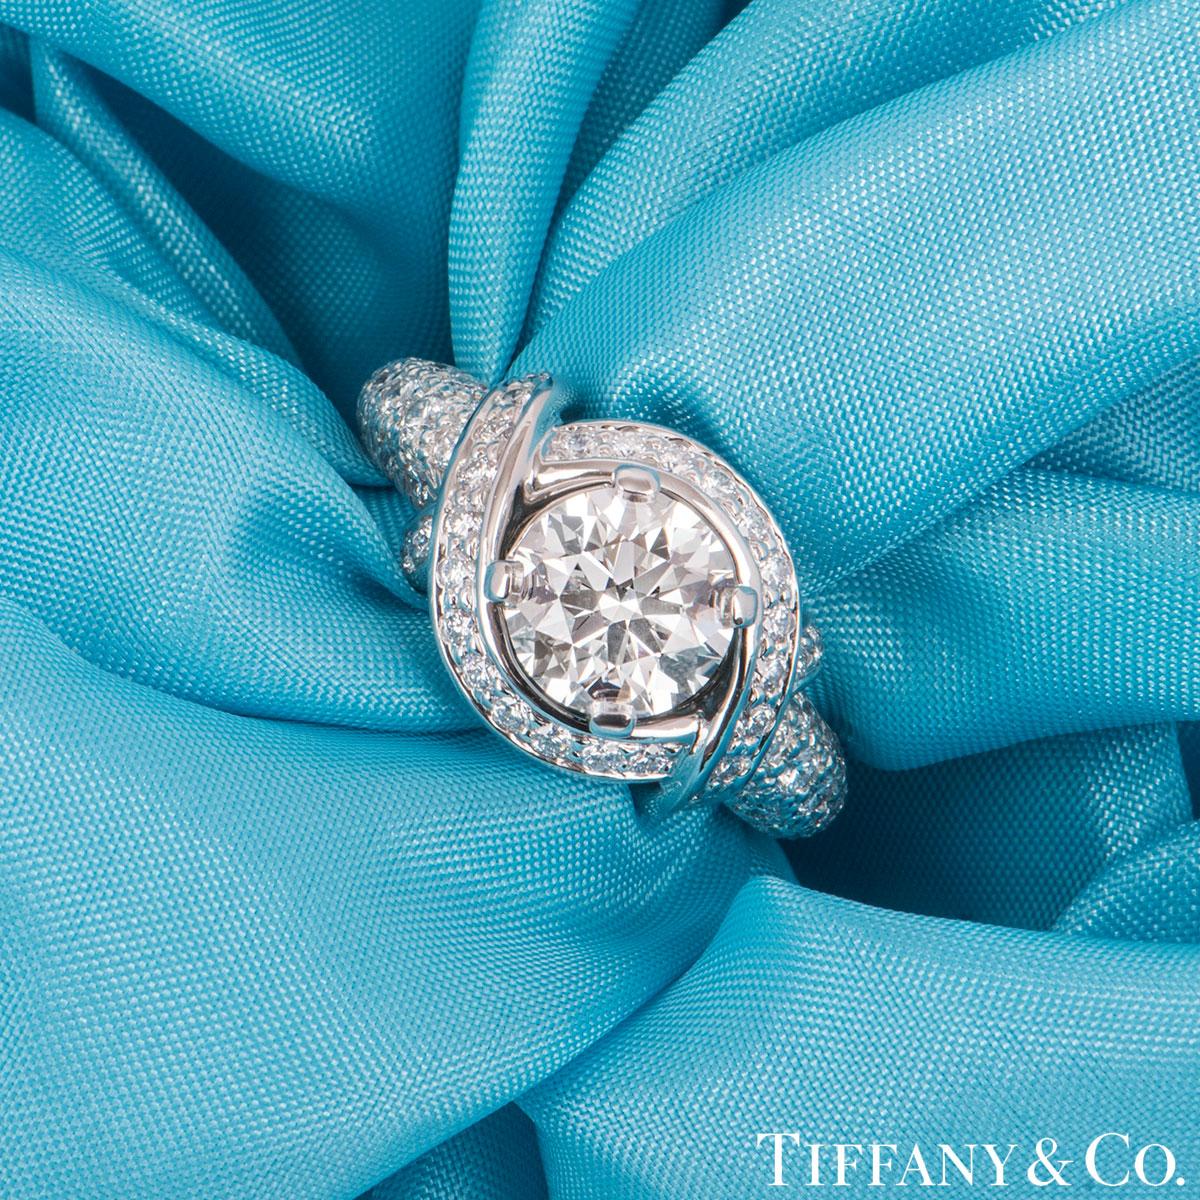 A beautiful platinum diamond Tiffany & Co. ring from the Schlumberger collection. The ring comprises of a round brilliant cut diamond in a 4 claw setting with a weight of 1.55ct, G colour and VVS2 clarity. The ring features approximately 90 round